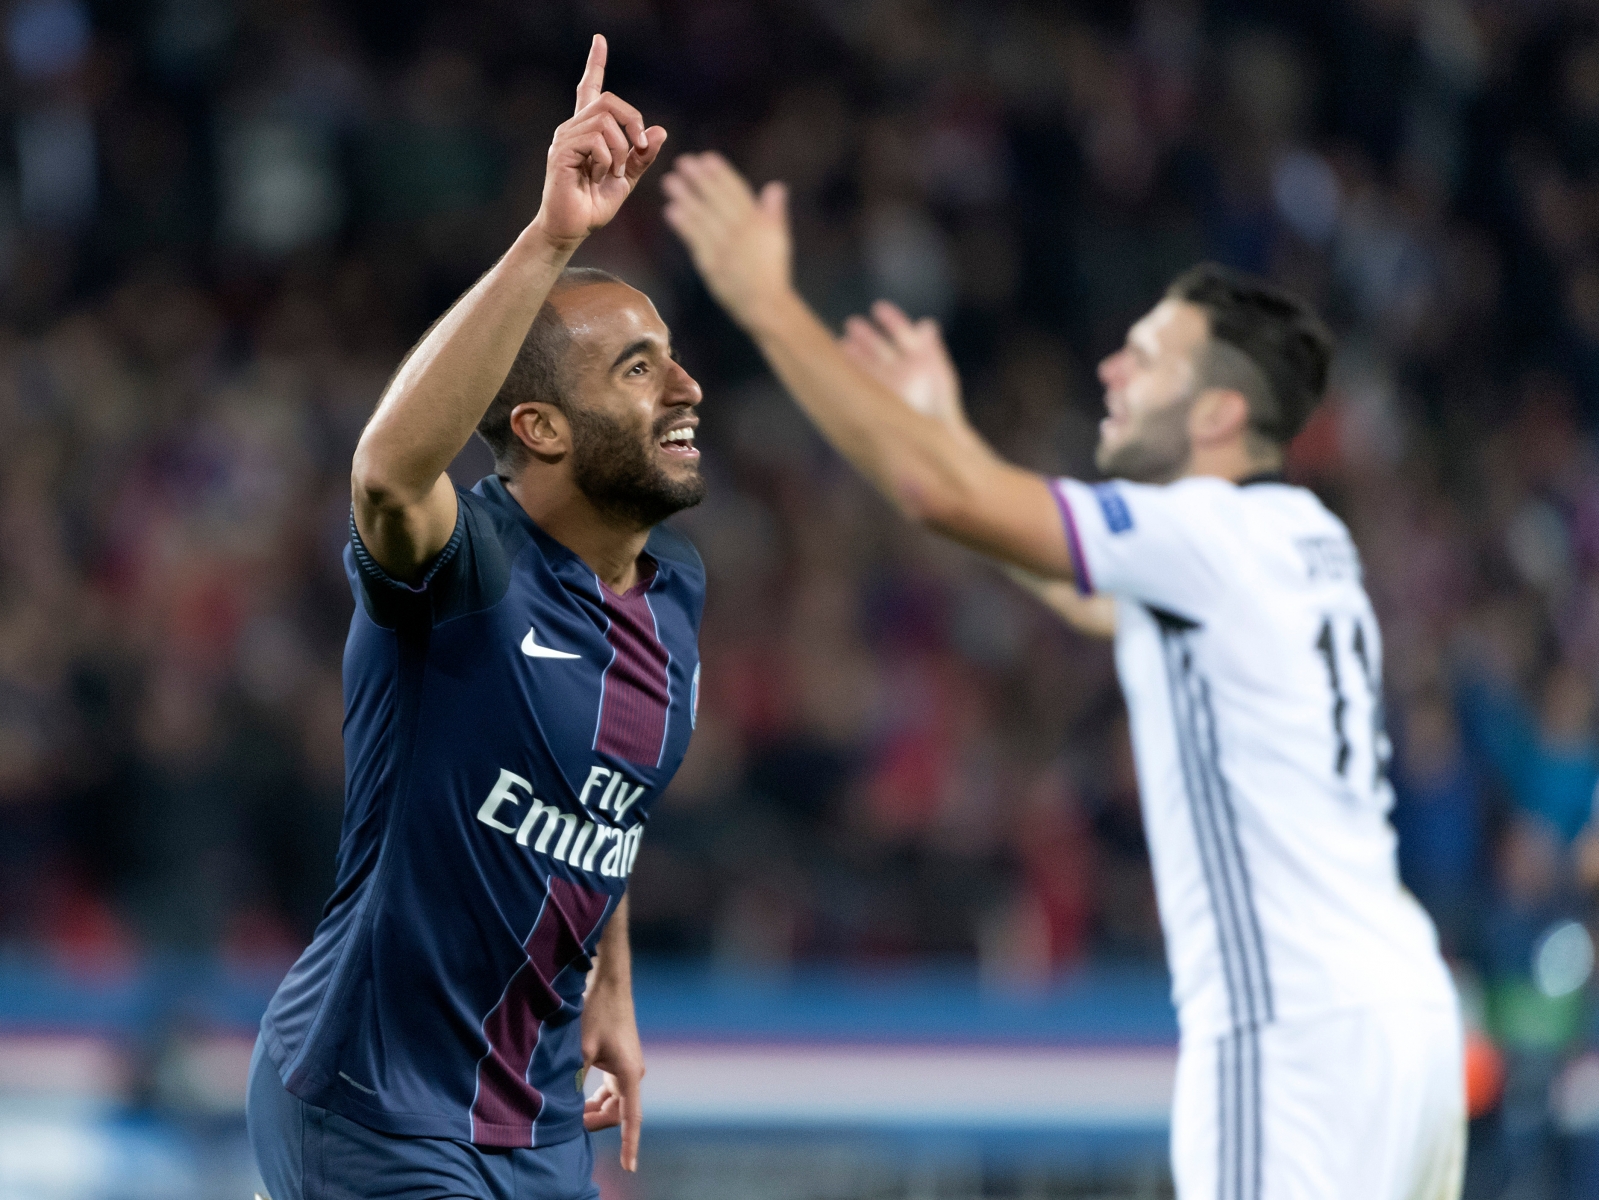 Paris' Lucas cheers after scoring during an UEFA Champions League Group stage Group A matchday 3 soccer match between France's Paris Saint-Germain Football Club and Switzerland's FC Basel 1893 at the Parc des Princes stadium in Paris, France, on Wednesday, October 19, 2016. (KEYSTONE/Georgios Kefalas) FRANCE UEFA CHAMPIONS LEAGUE PARIS BASEL